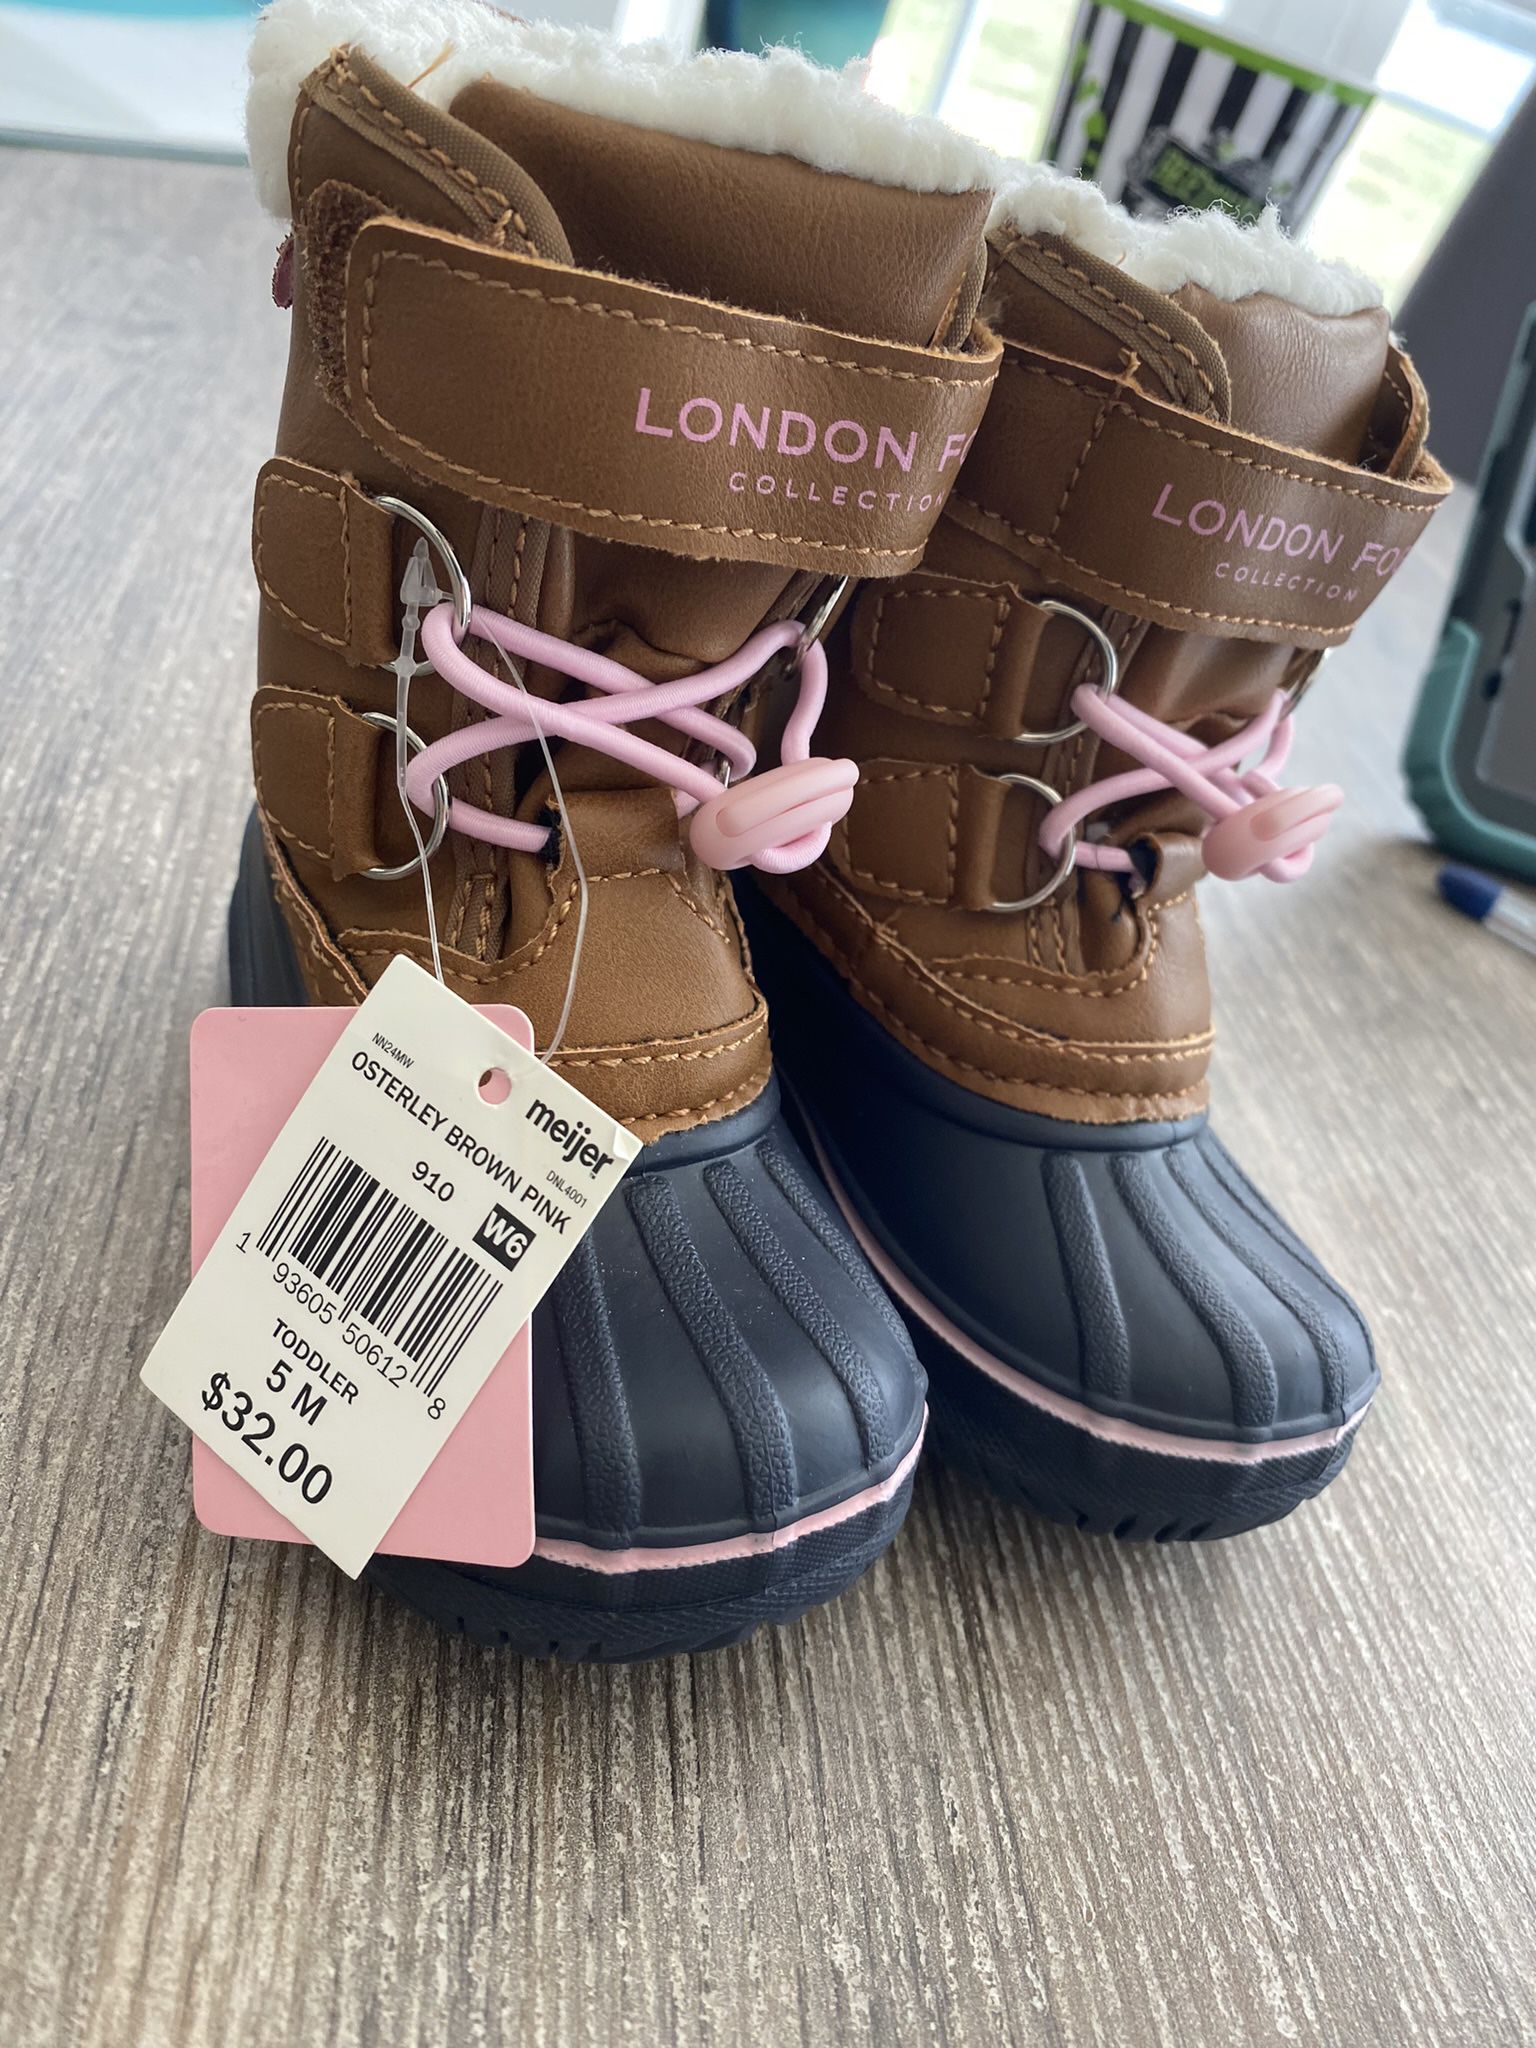 toddler winter boots $25 size 5M